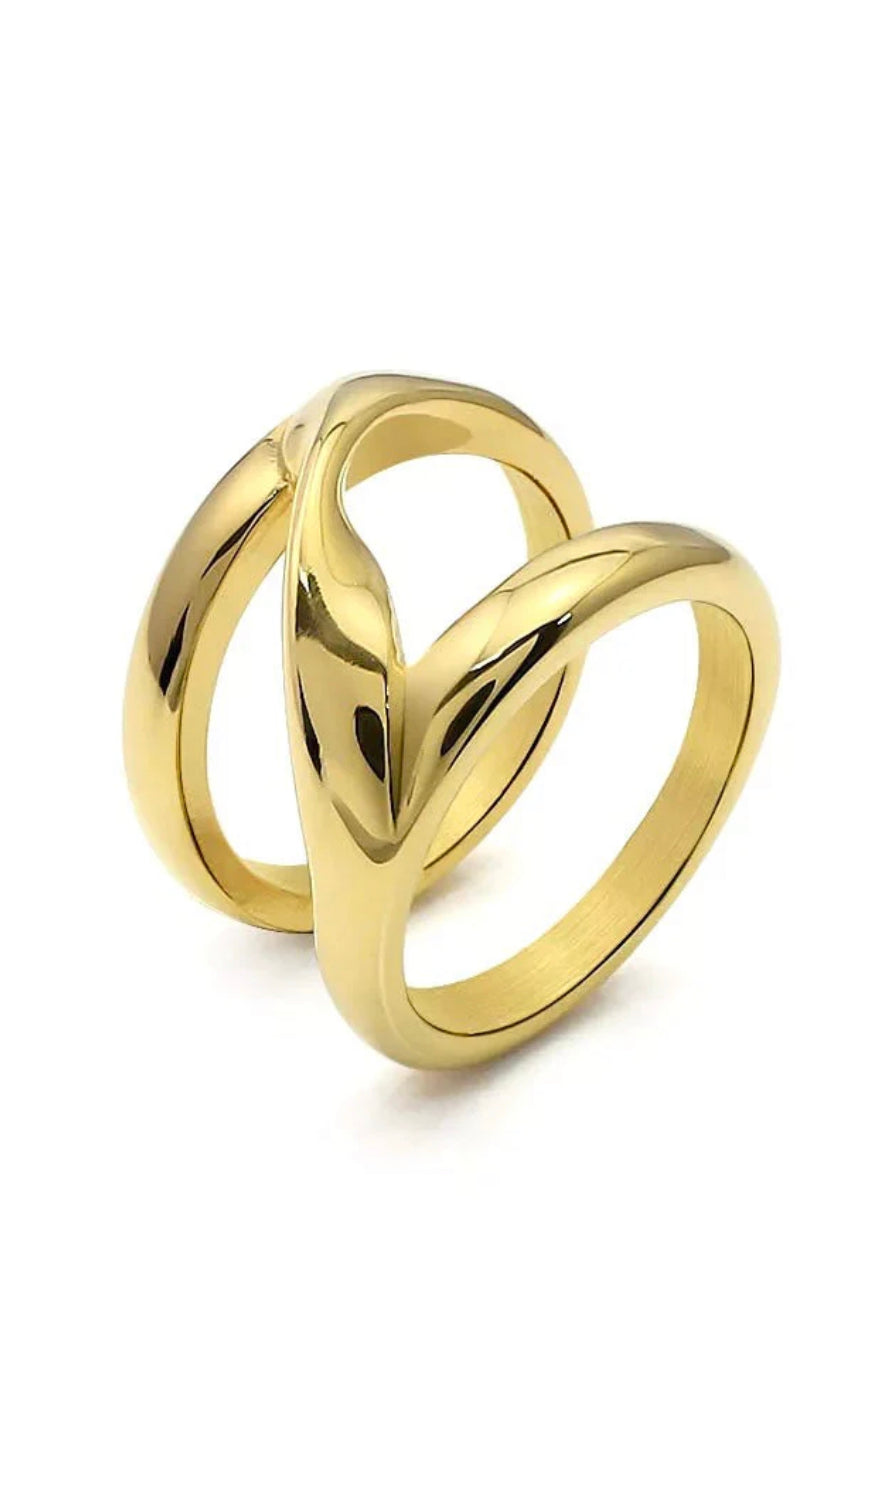 Gold twisted ring